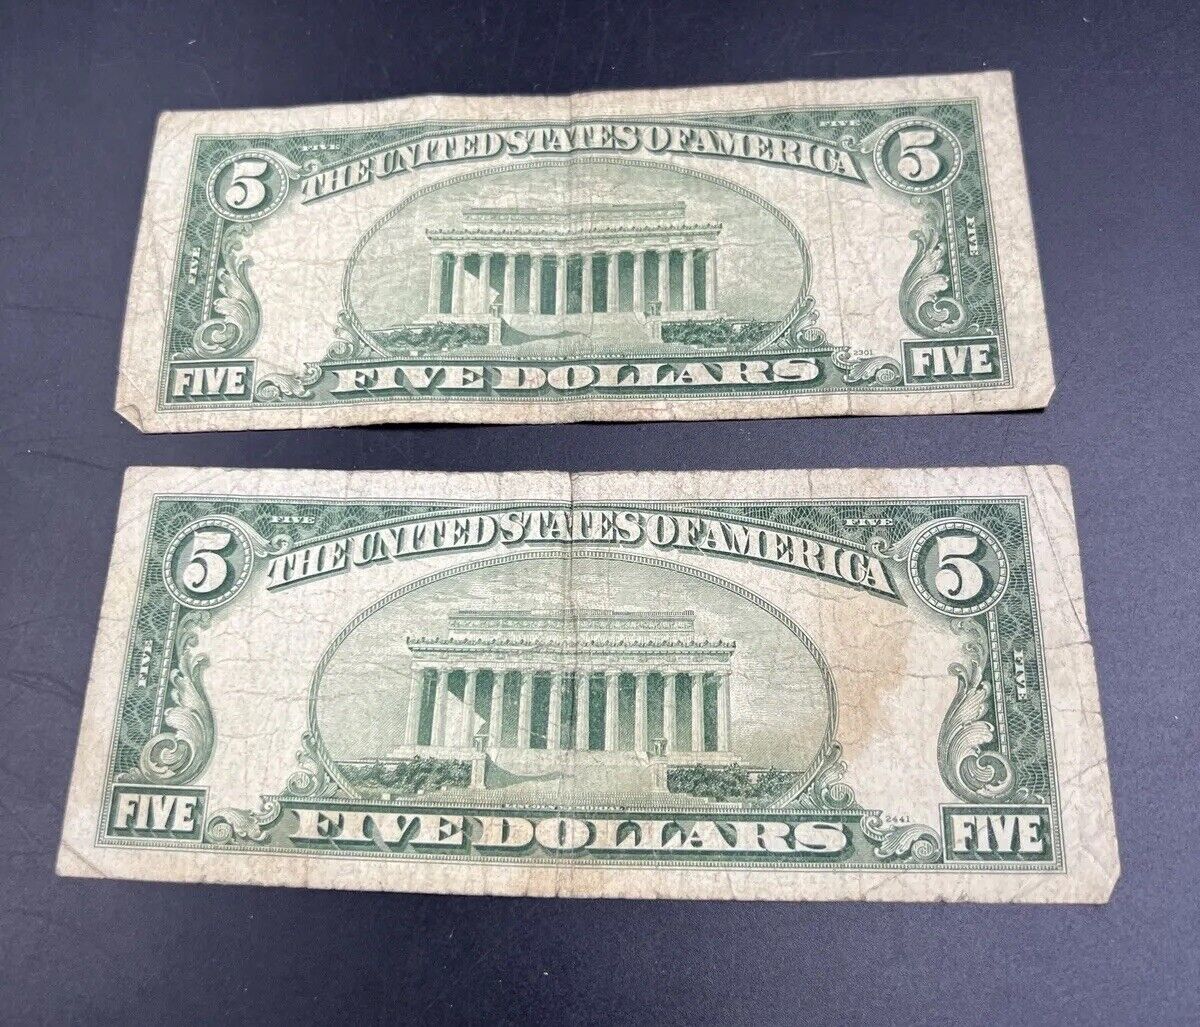 Lot of 2 Cull 1950 B $5 Five Dollar FRN Federal Reserve Notes Very Circulated